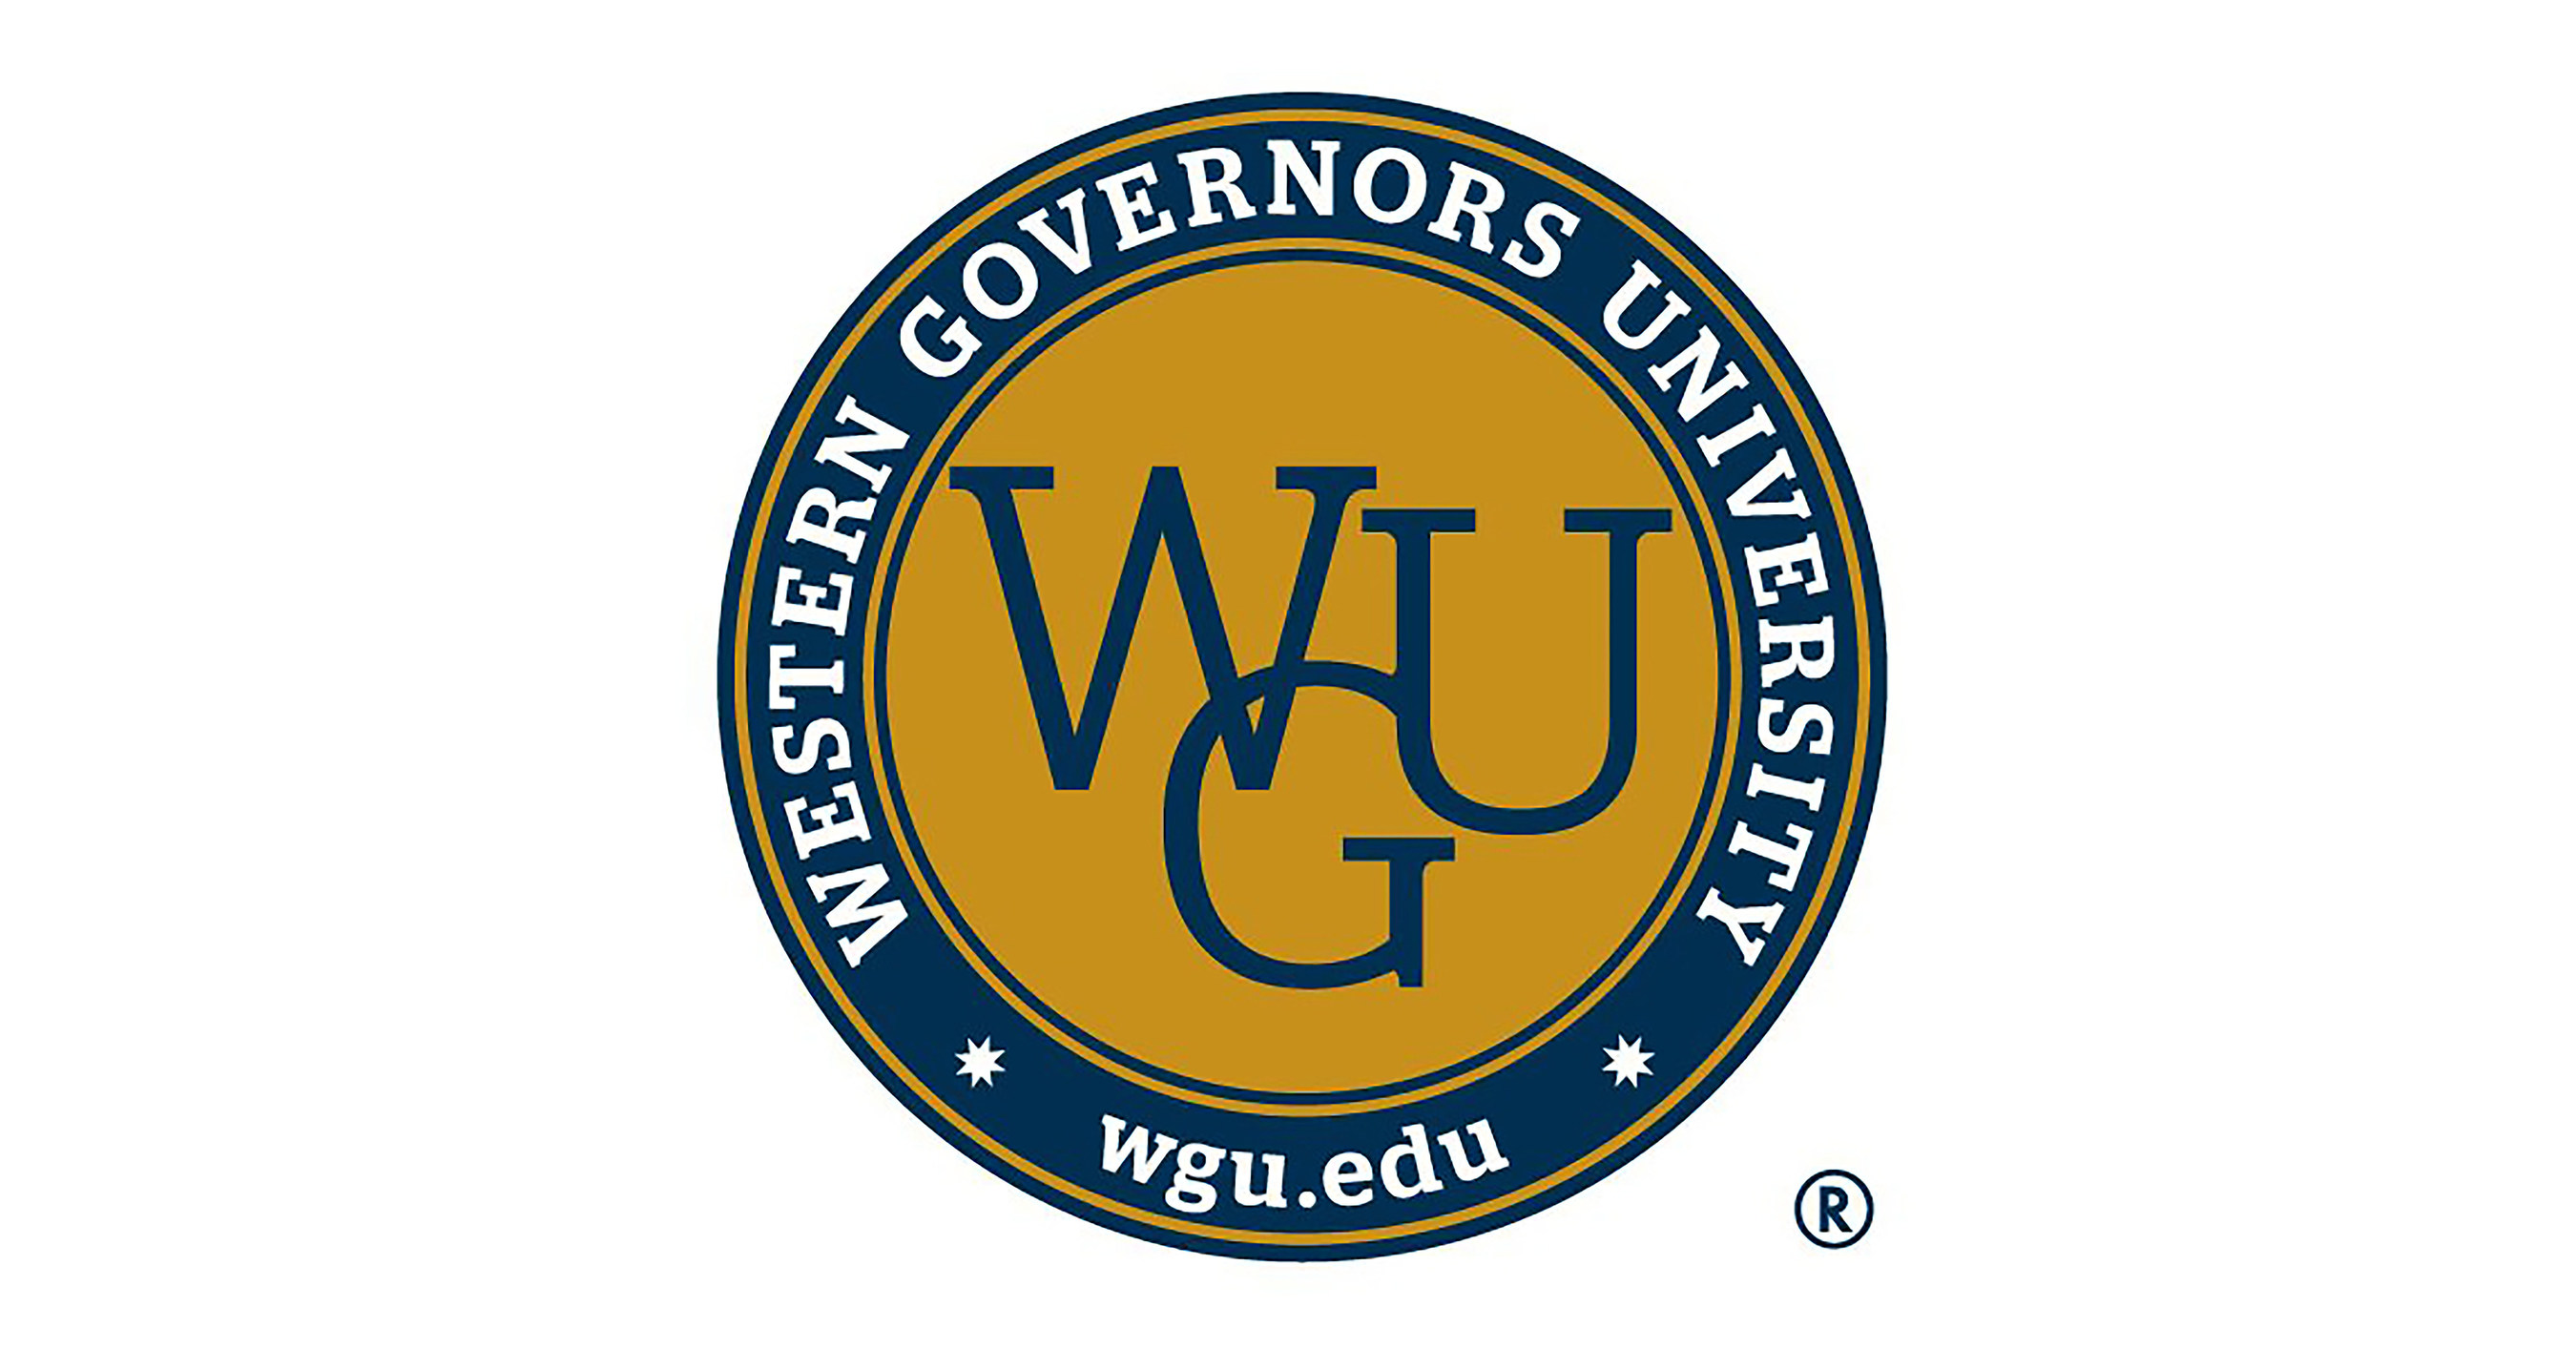 Wgu Recognized By Worlds Largest Cybersecurity Certification Body As Academia Partner Of The Year 3914